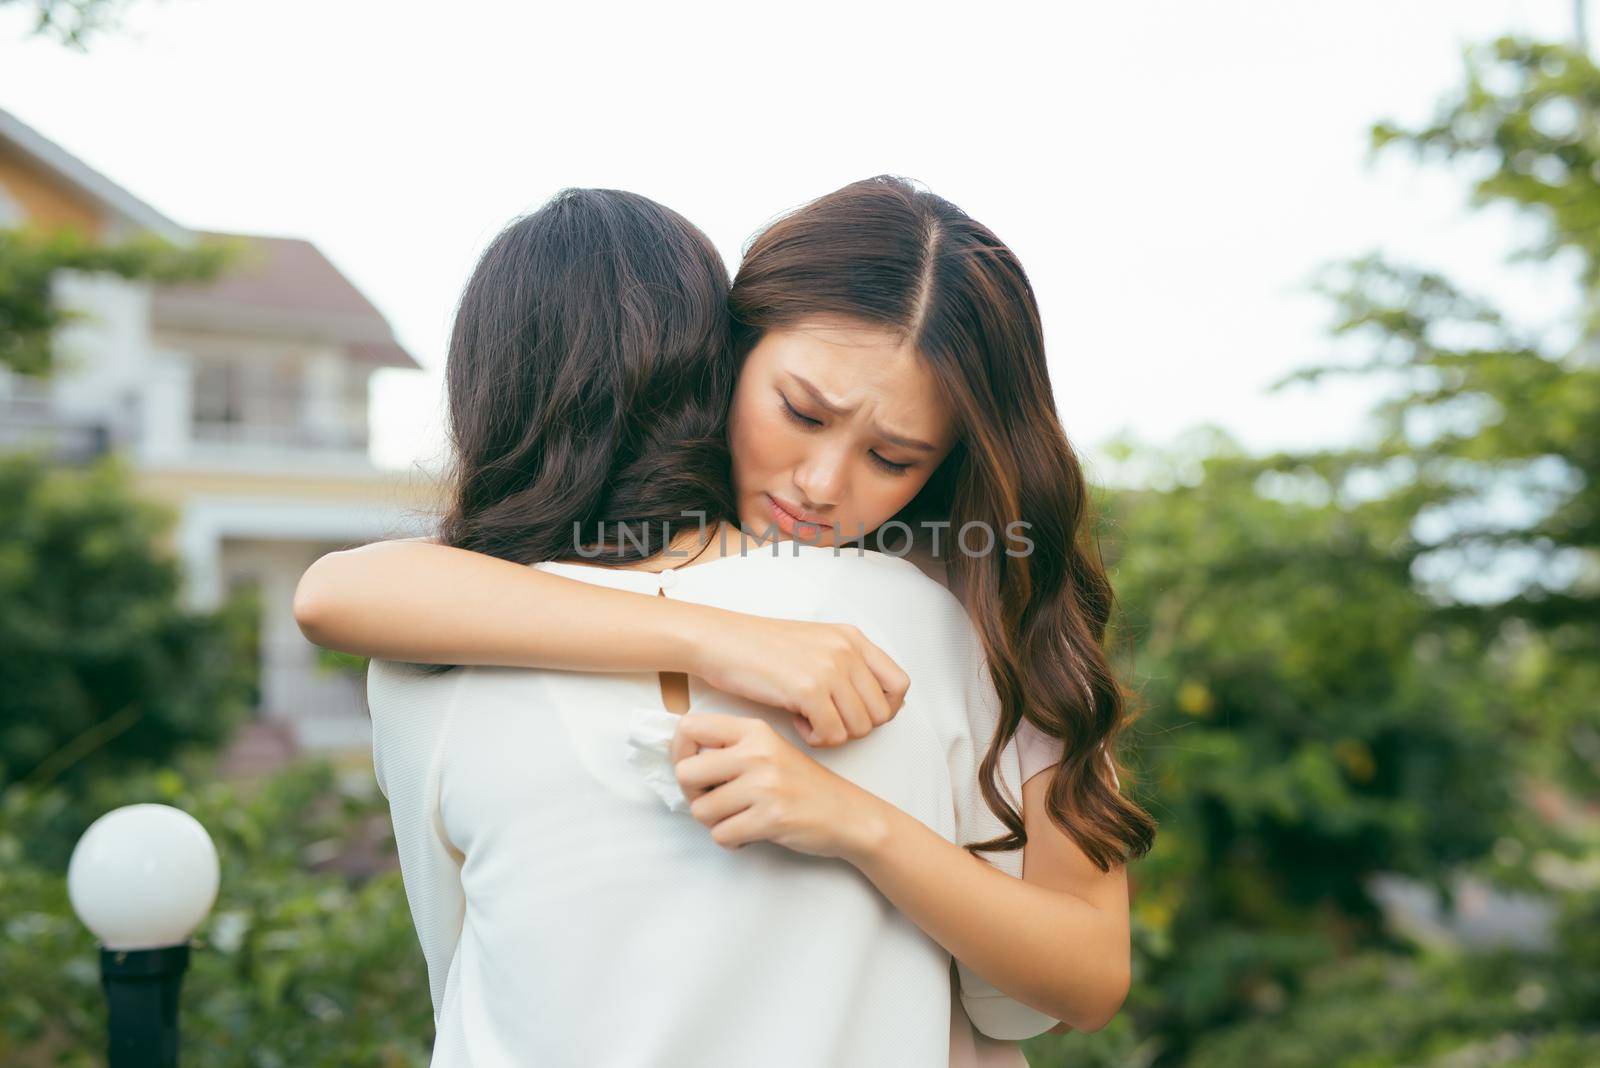 Friendship help support and difficult times concept. Human emotions feelings